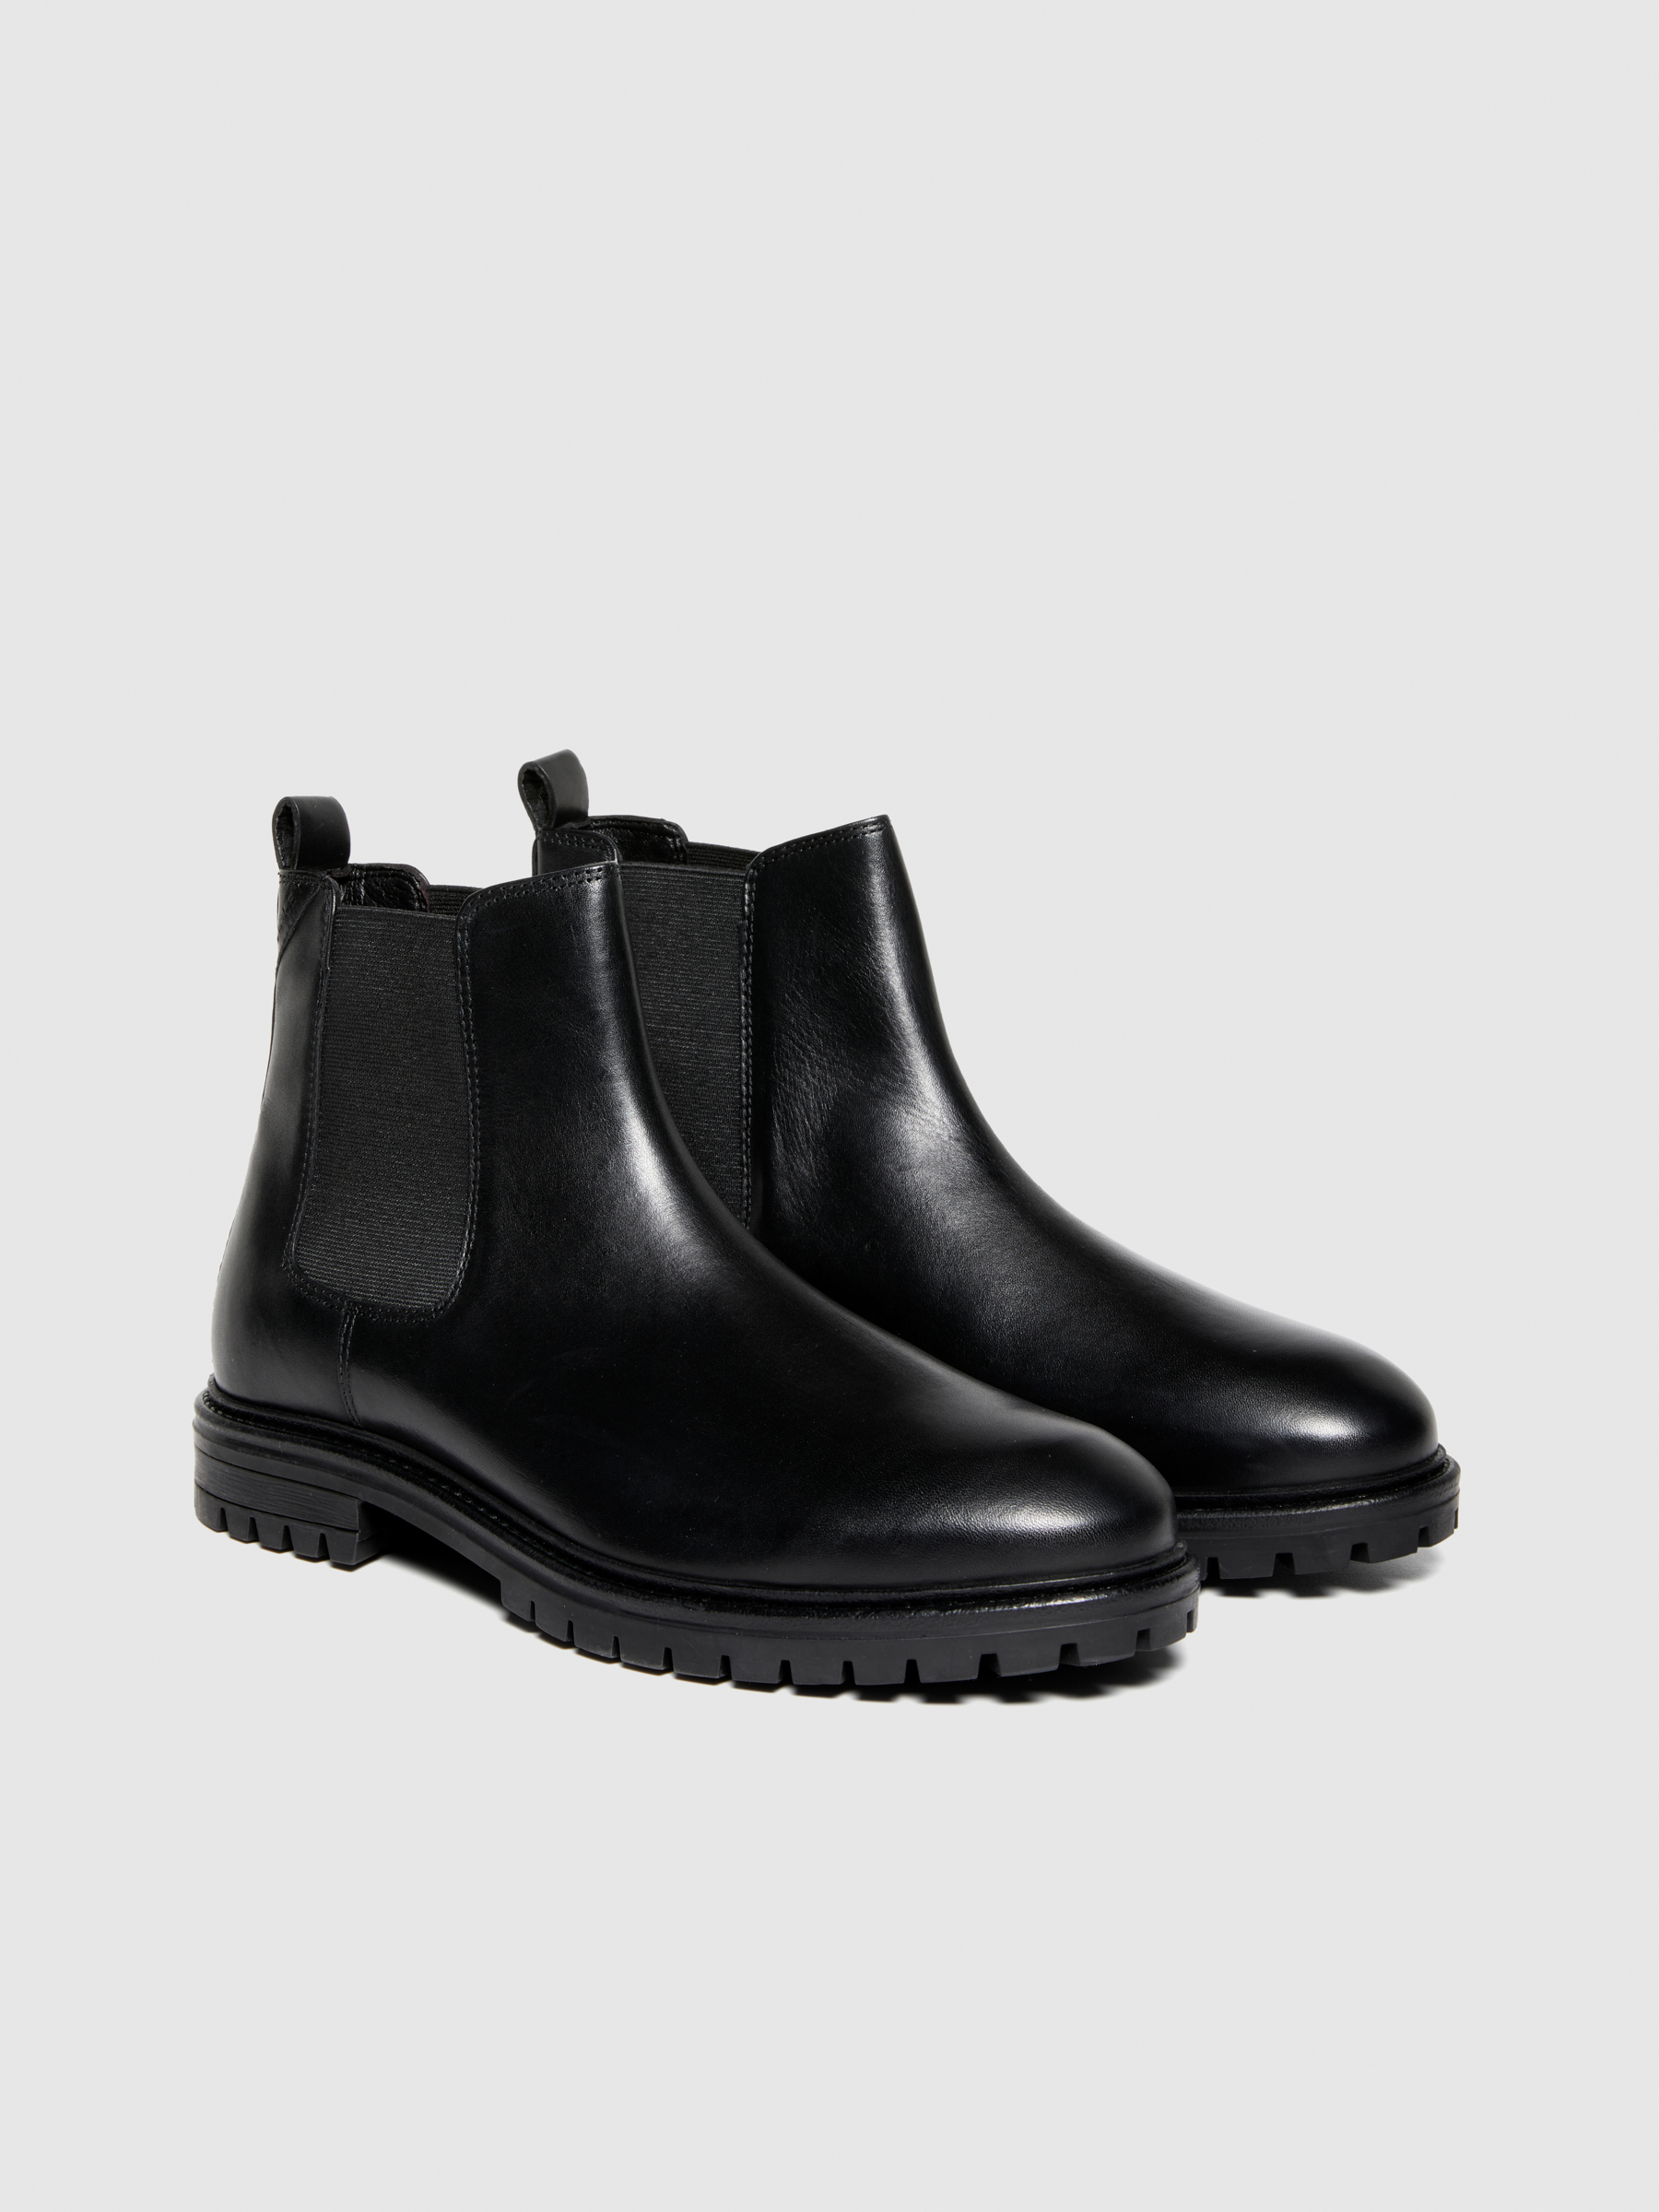 Sisley - Leather Chelsea Boots, Man, Black, Size: 42